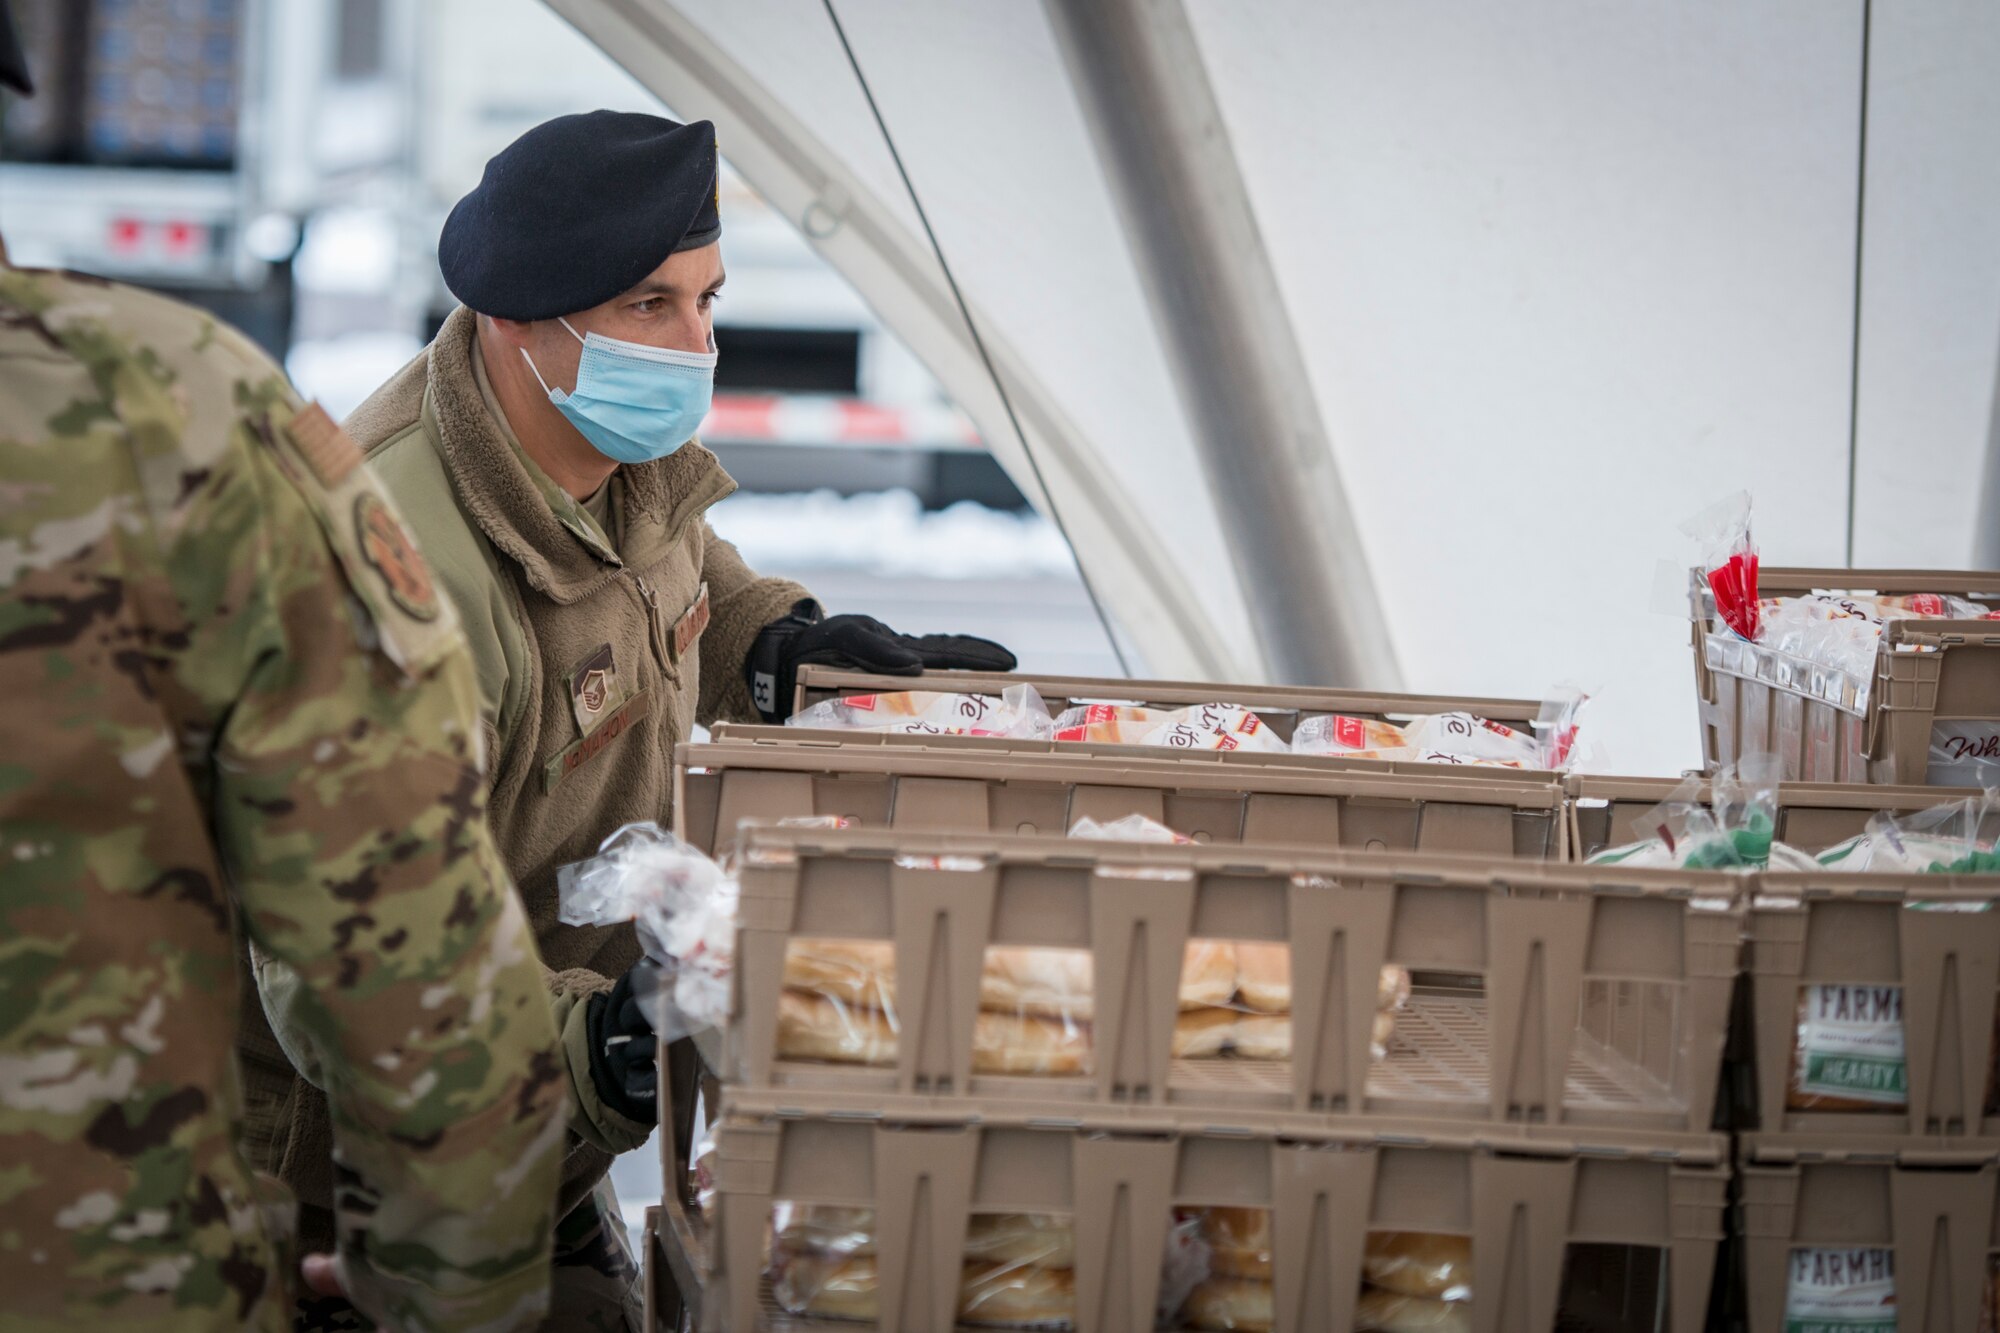 U.S. Air Force Master Sgt. Ian McMahon, 103rd Security Forces Squadron, organizes bread trays for distribution at Rentschler Field in East Hartford, Connecticut, Feb. 4, 2021. Airmen from the Connecticut National Guard’s 103rd Airlift Wing are supporting logistics operations at Foodshare’s drive-thru emergency distribution site here, which has distributed over 8,000,000 pounds of food to 233,000 cars since April 20, 2020. (U.S. Air National Guard photo by Staff Sgt. Steven Tucker)